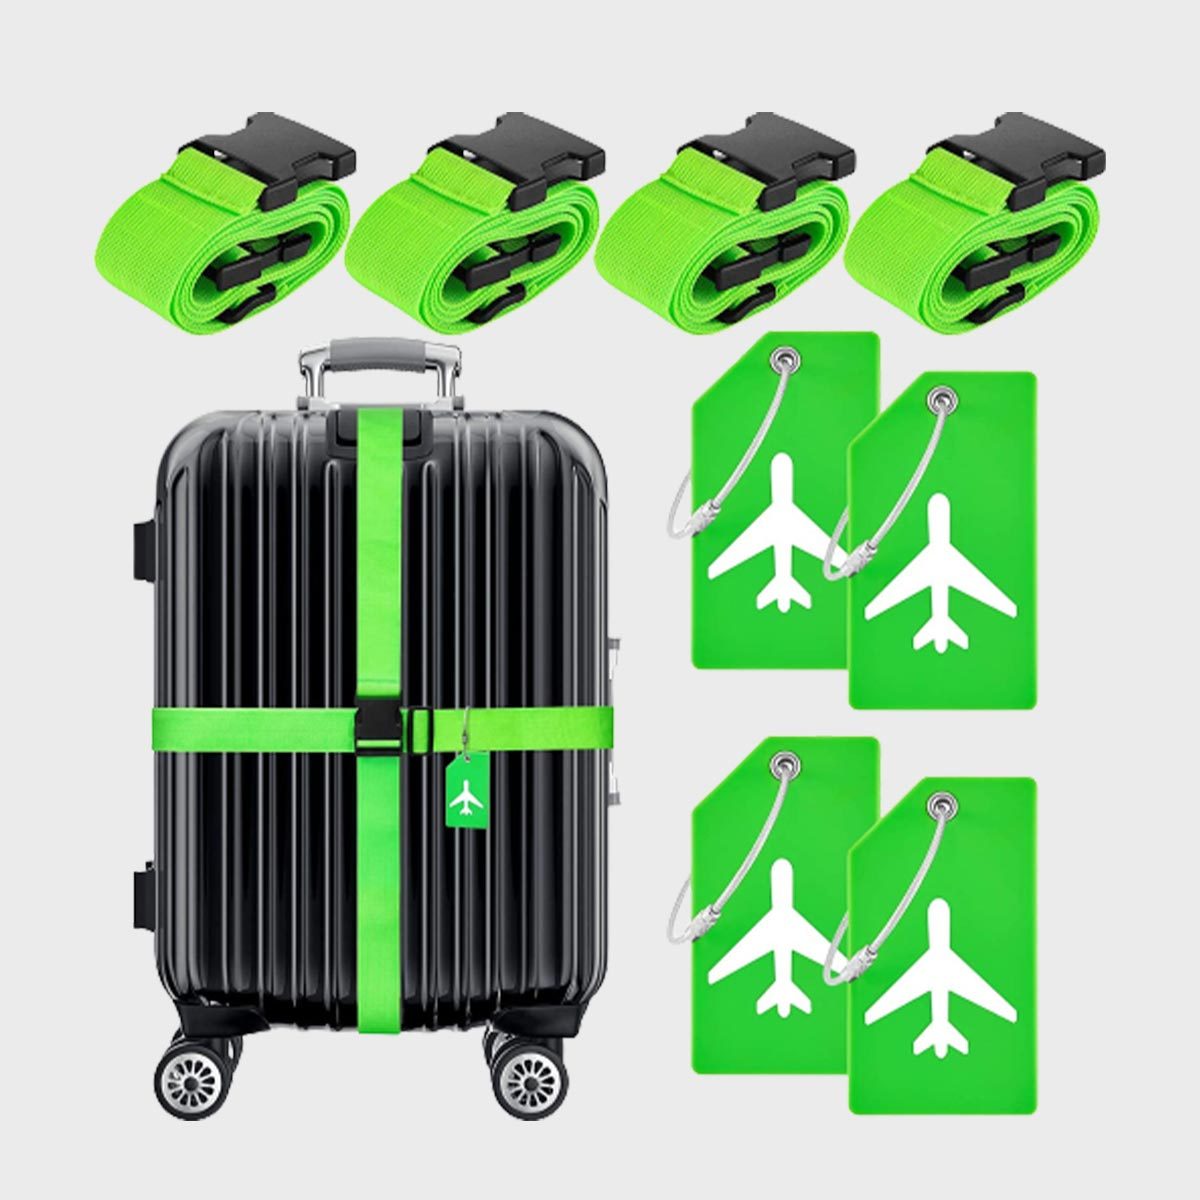 The Best Luggage Tags To Make Your Bags Stand Out | Travel Accessories